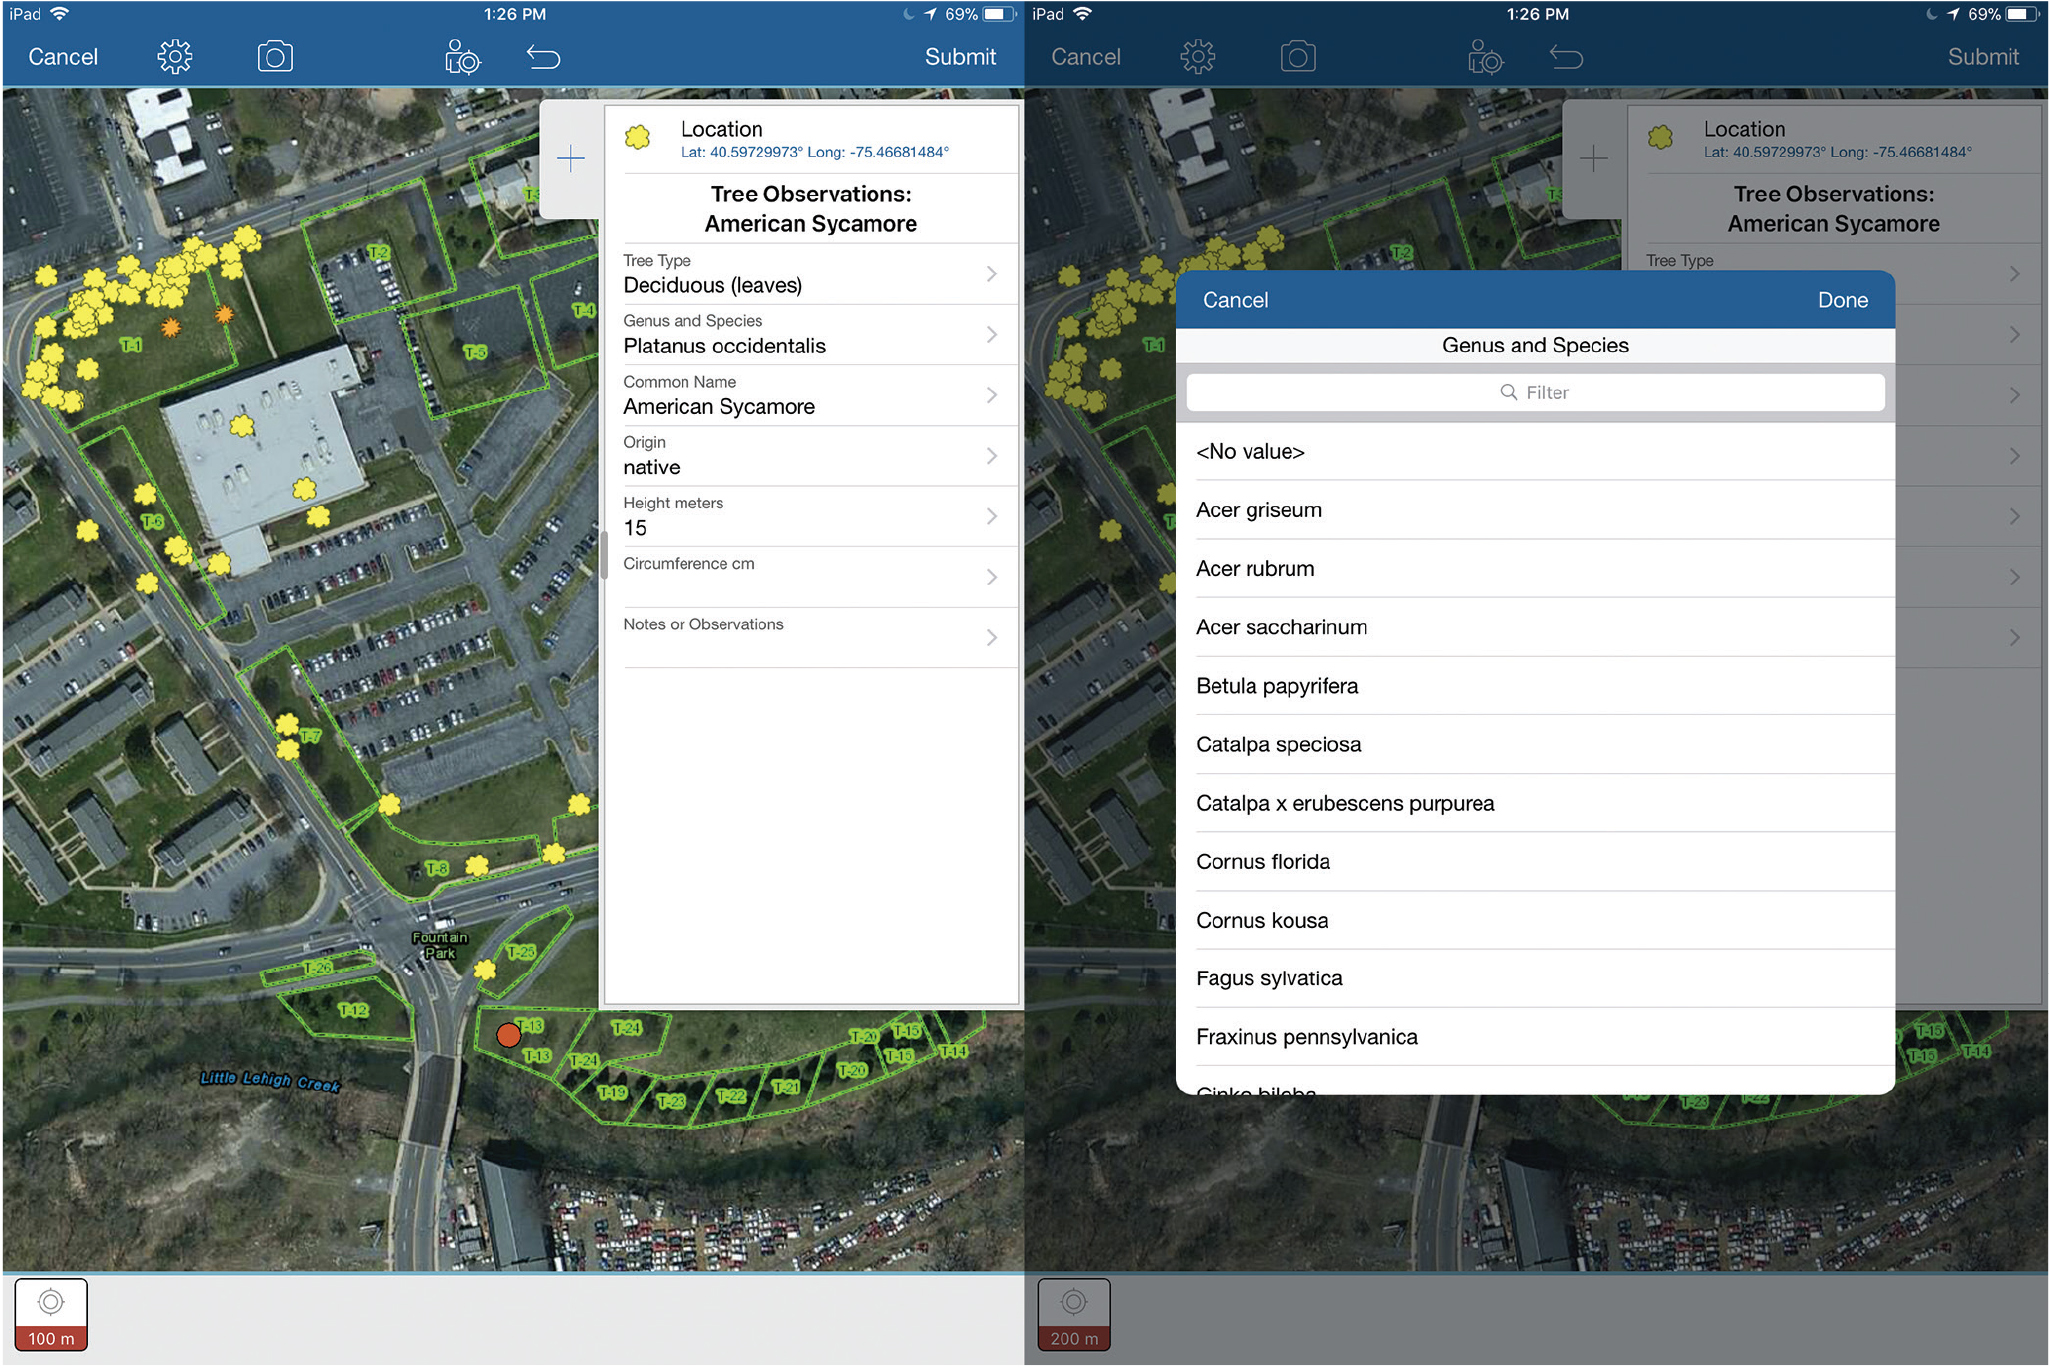 Esri Collector app user interface showing data entry fields. Selecting the Genus and Species option opens a customized list shown on the right. Other fields are manually filled by each student.